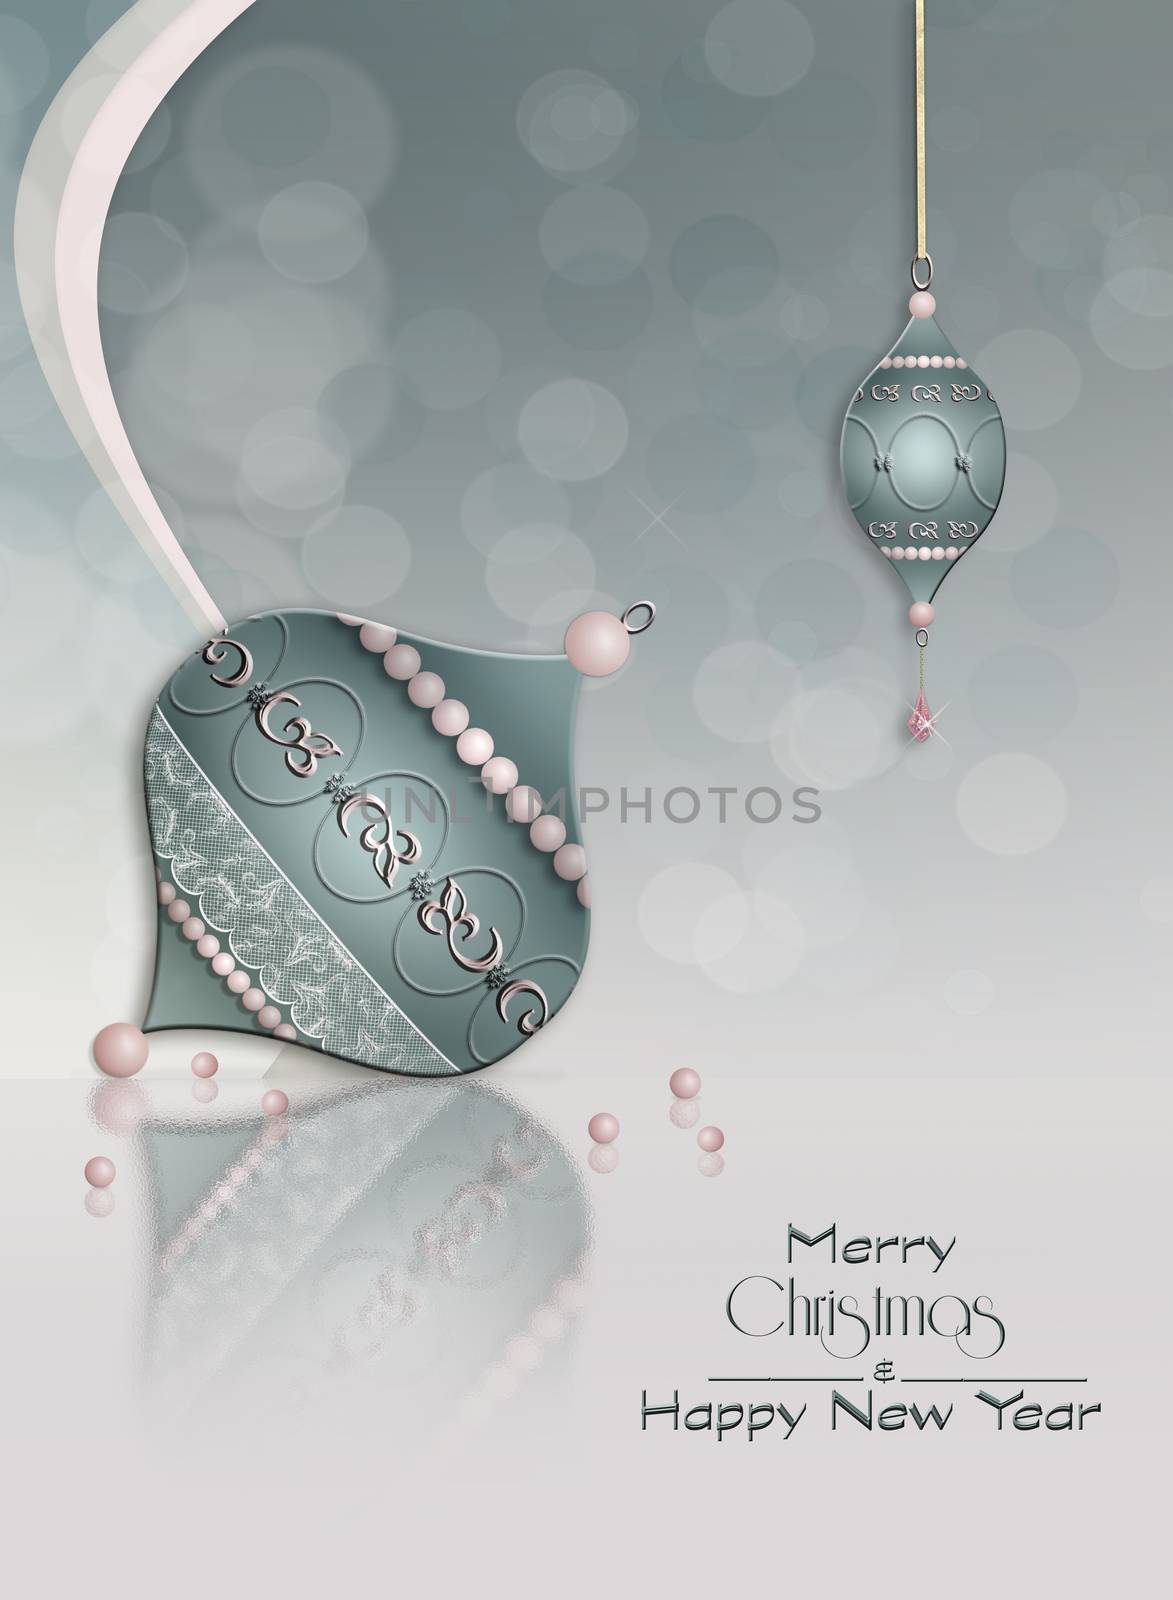 Elegant background with beautifully decorated Christmas balls baubles with reflection. Text Merry Christmas Happy New Year. 3D illustration